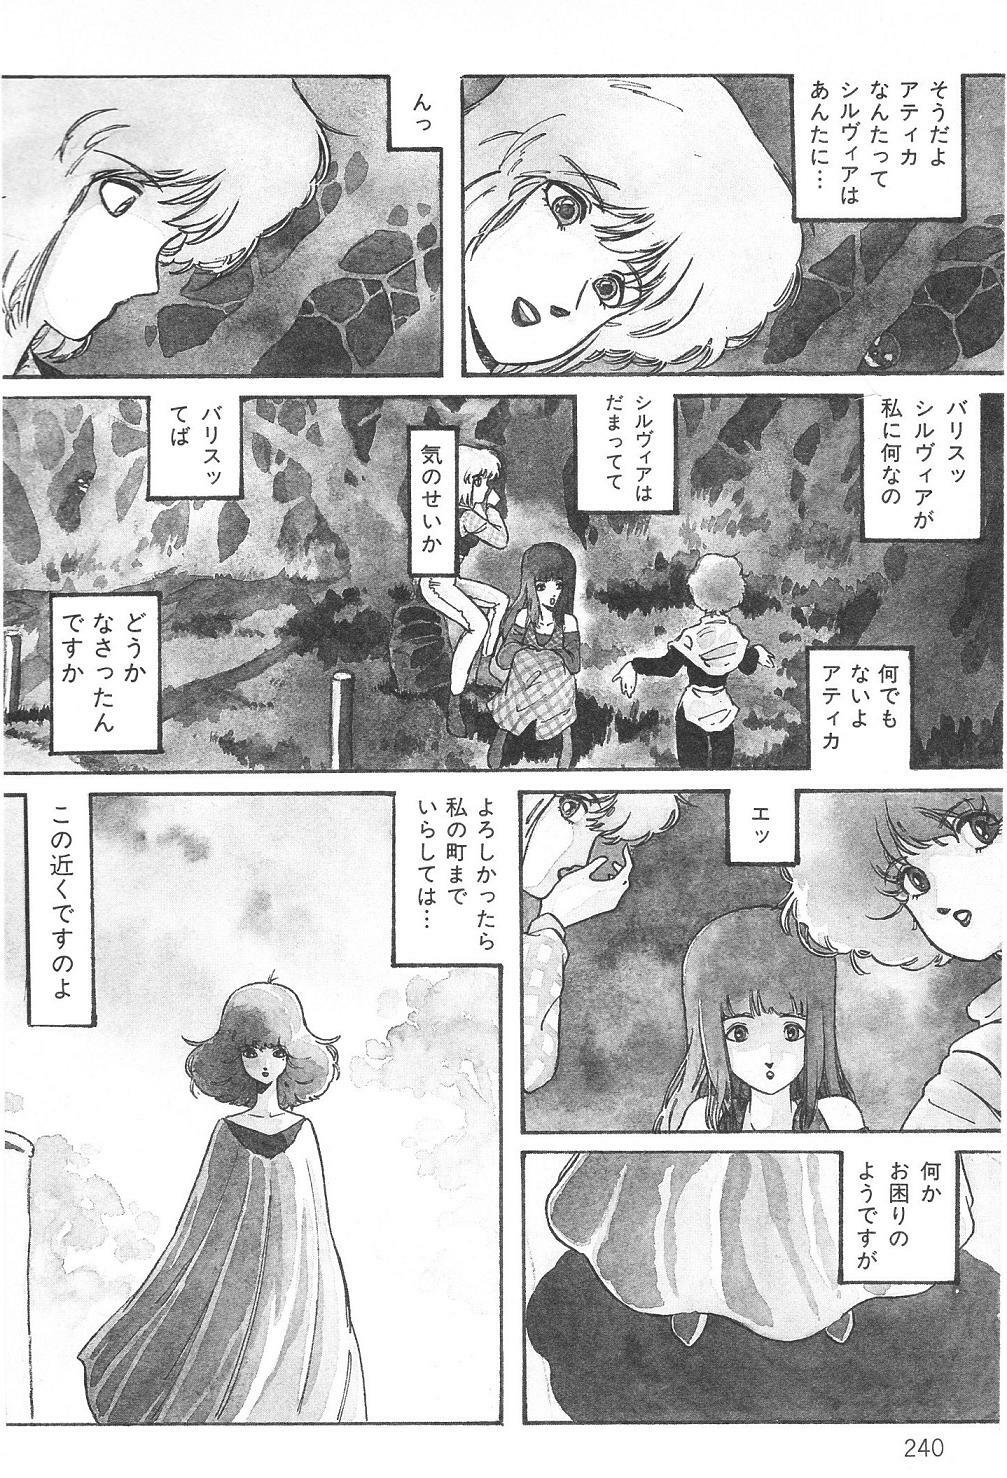 Aran-Rei THE TOWN OF HELLOWEEN page 6 full